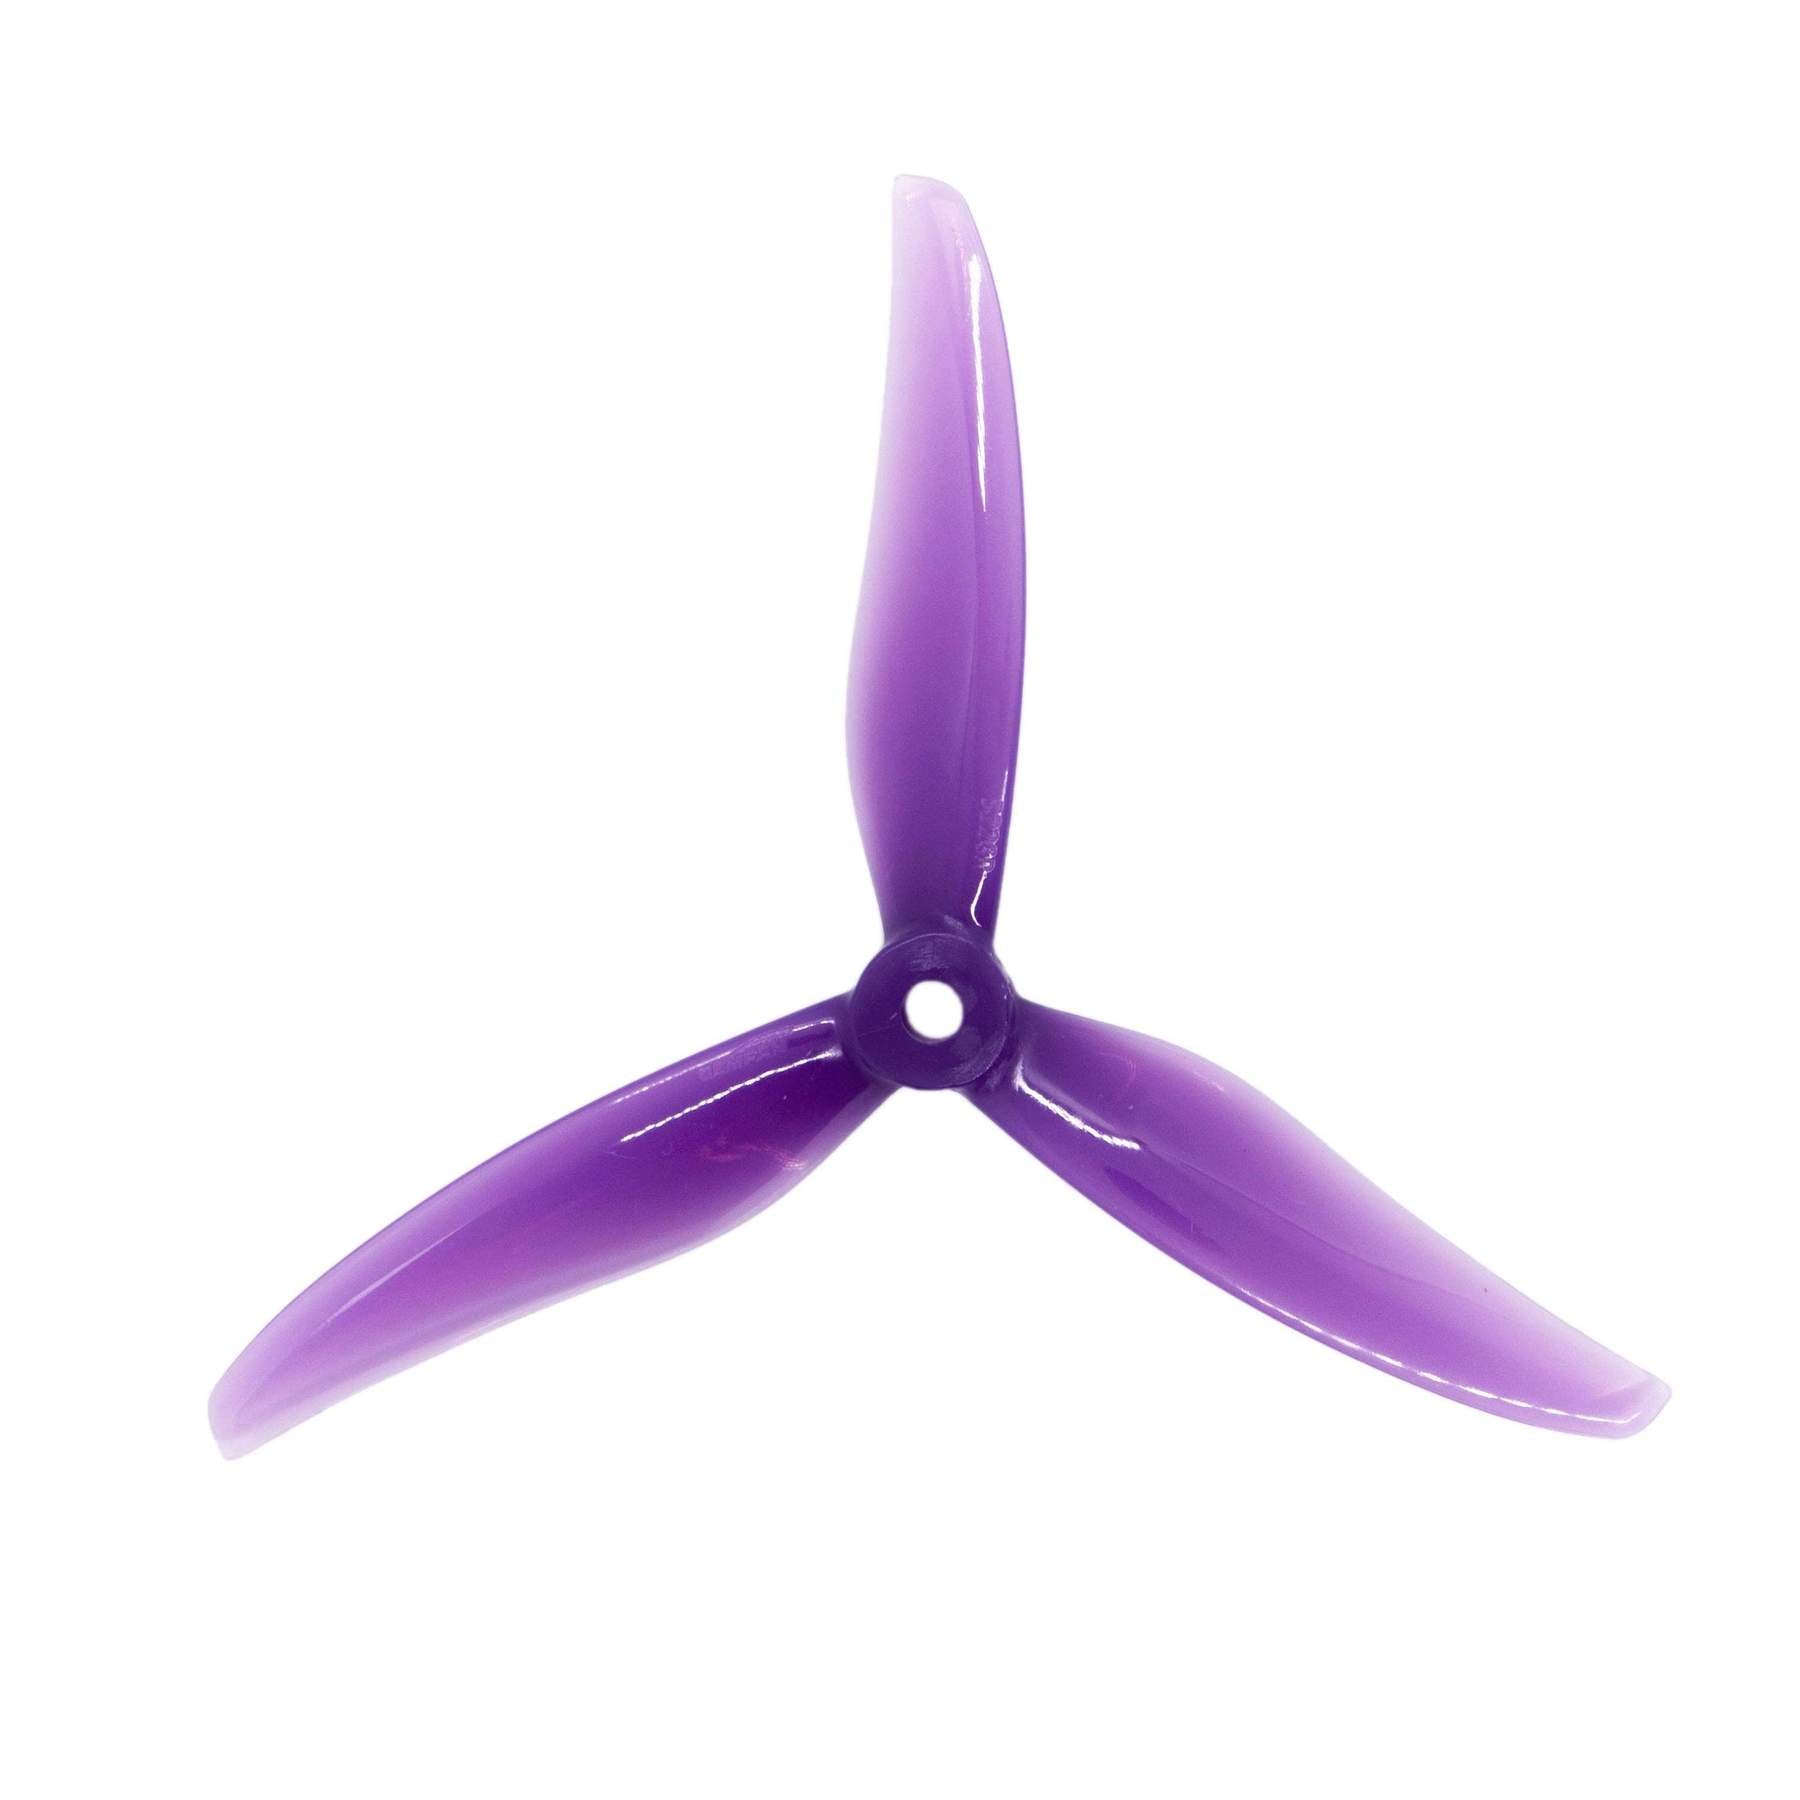 Gemfan Freestyle 5226 5.2" Durable Tri-Blade Propellers (2CW + 2CCW)